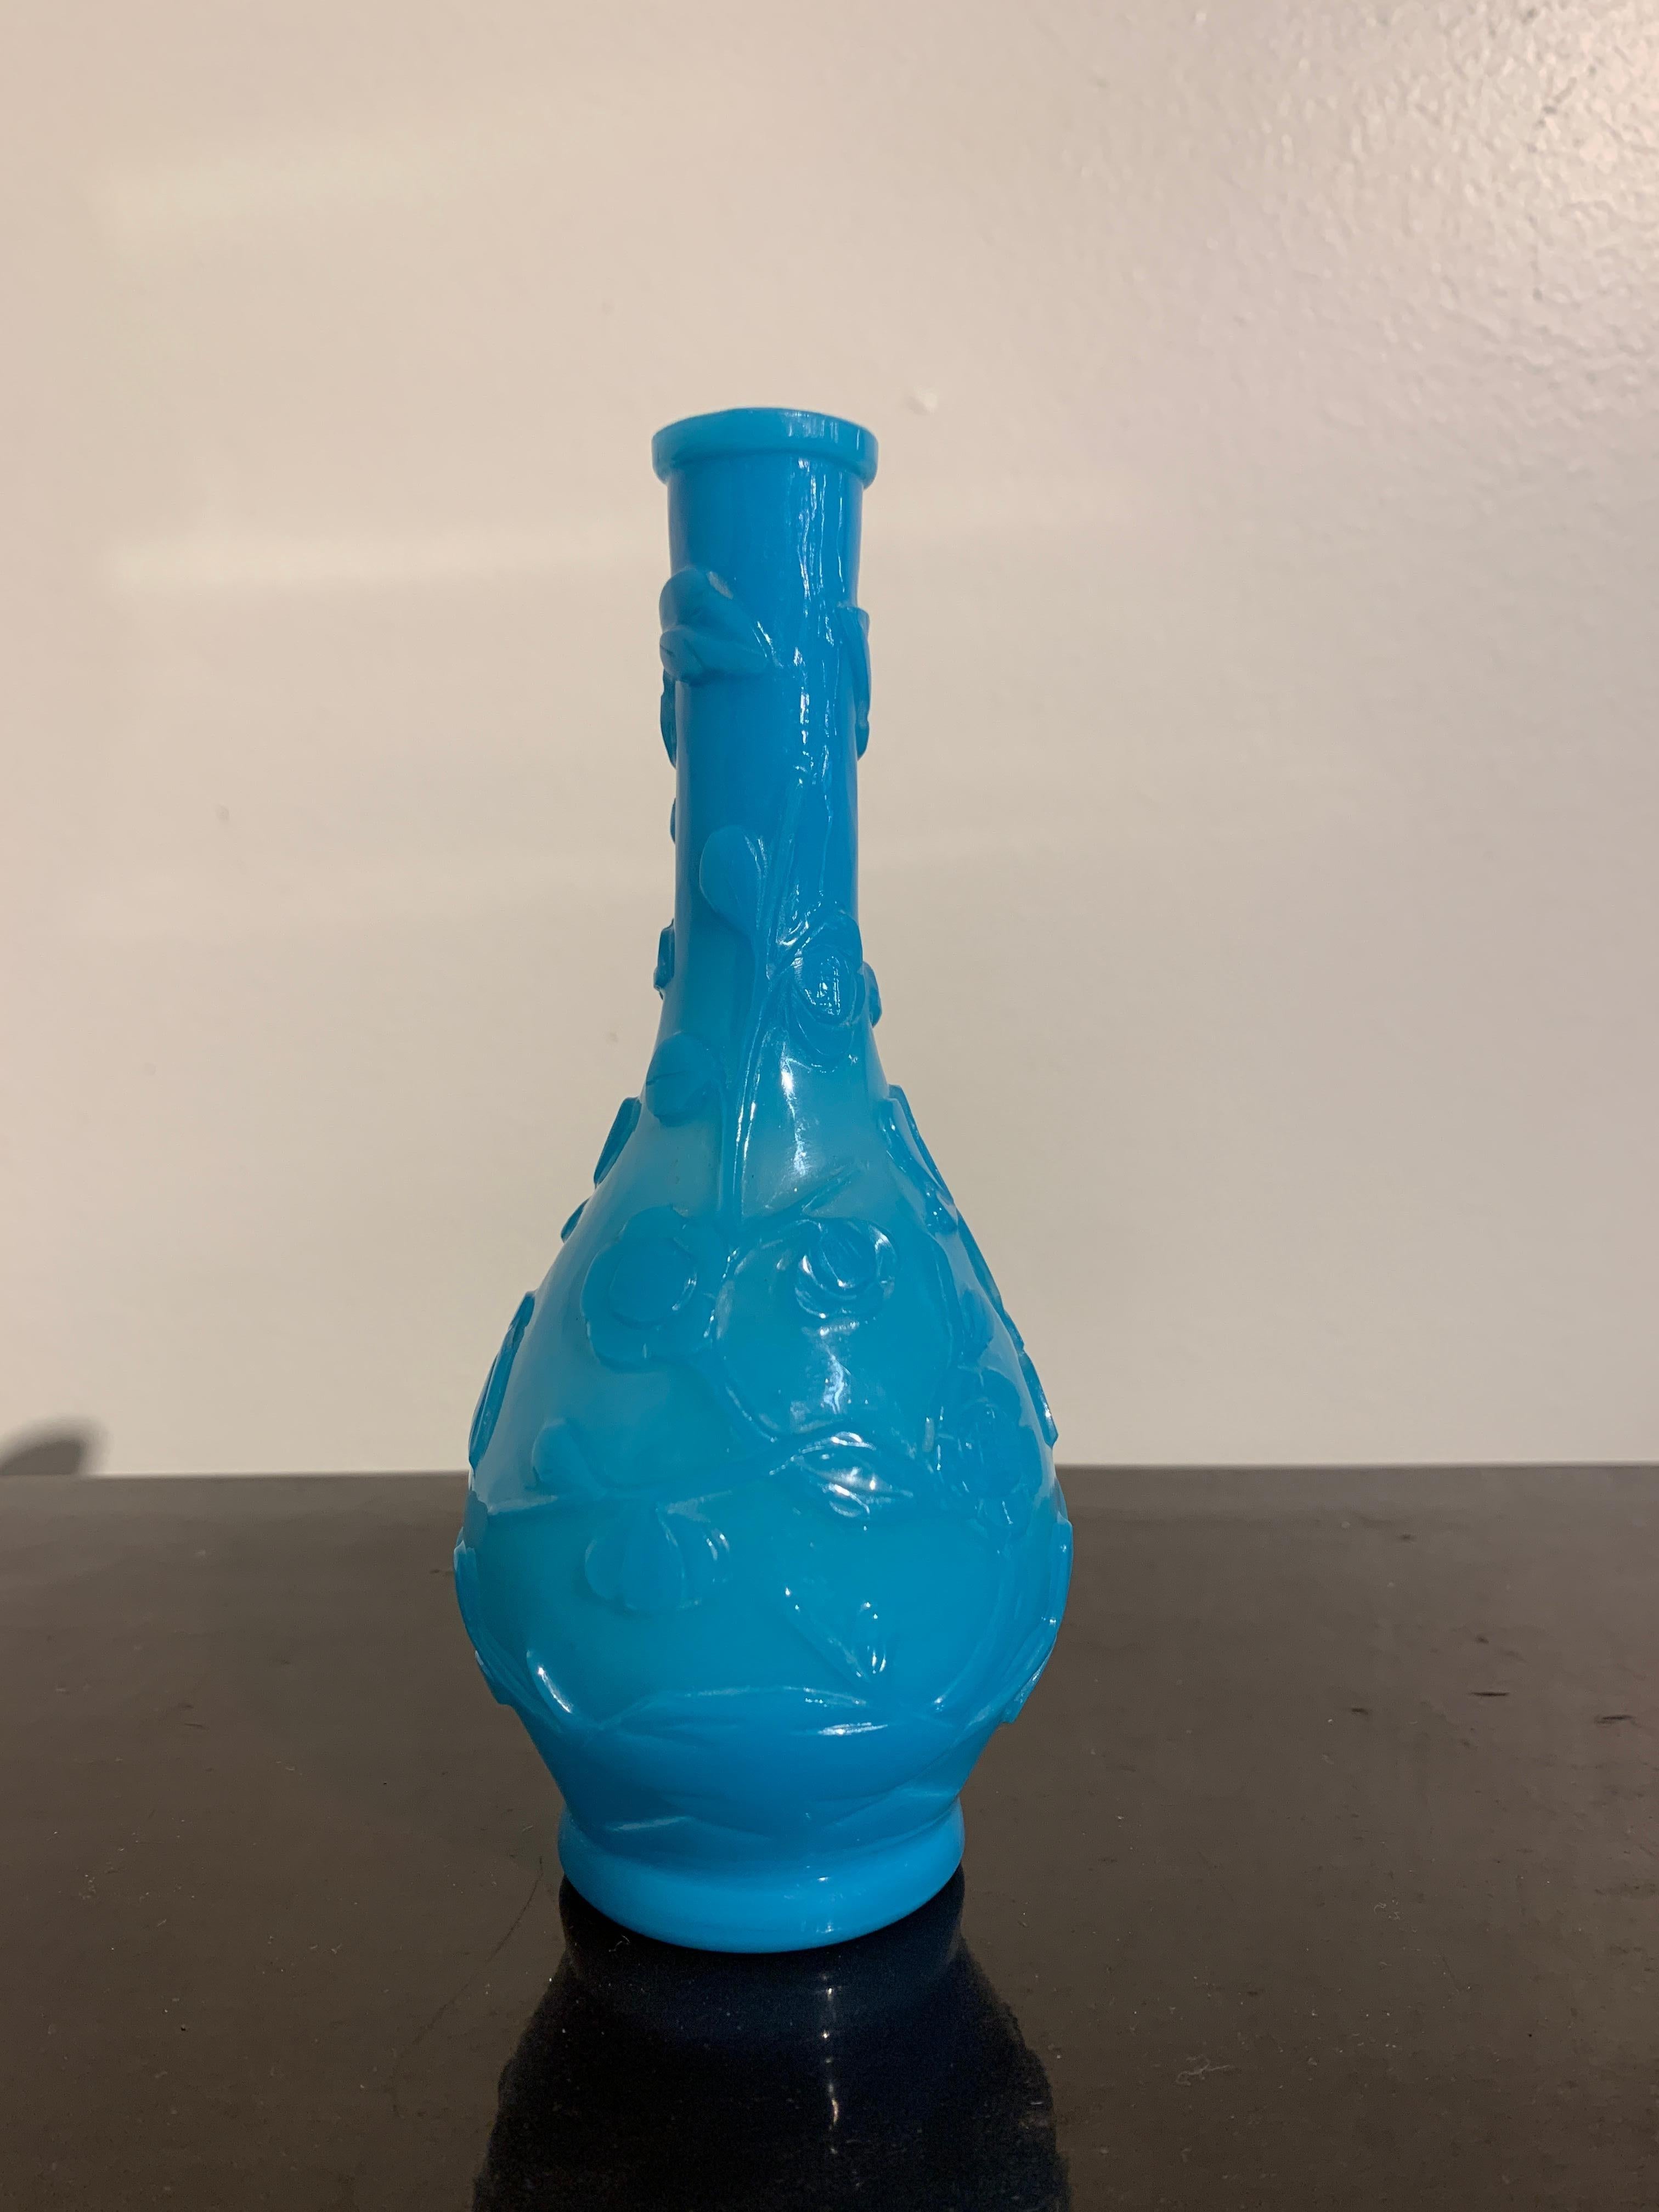 A small and charming turquoise blue carved Peking glass vase, Republic Period, early 20th century, China.

The Peking glass vase of elegant bottle shape featuring two shades of overlay blue. The outer layer of glass slightly darker than the inner